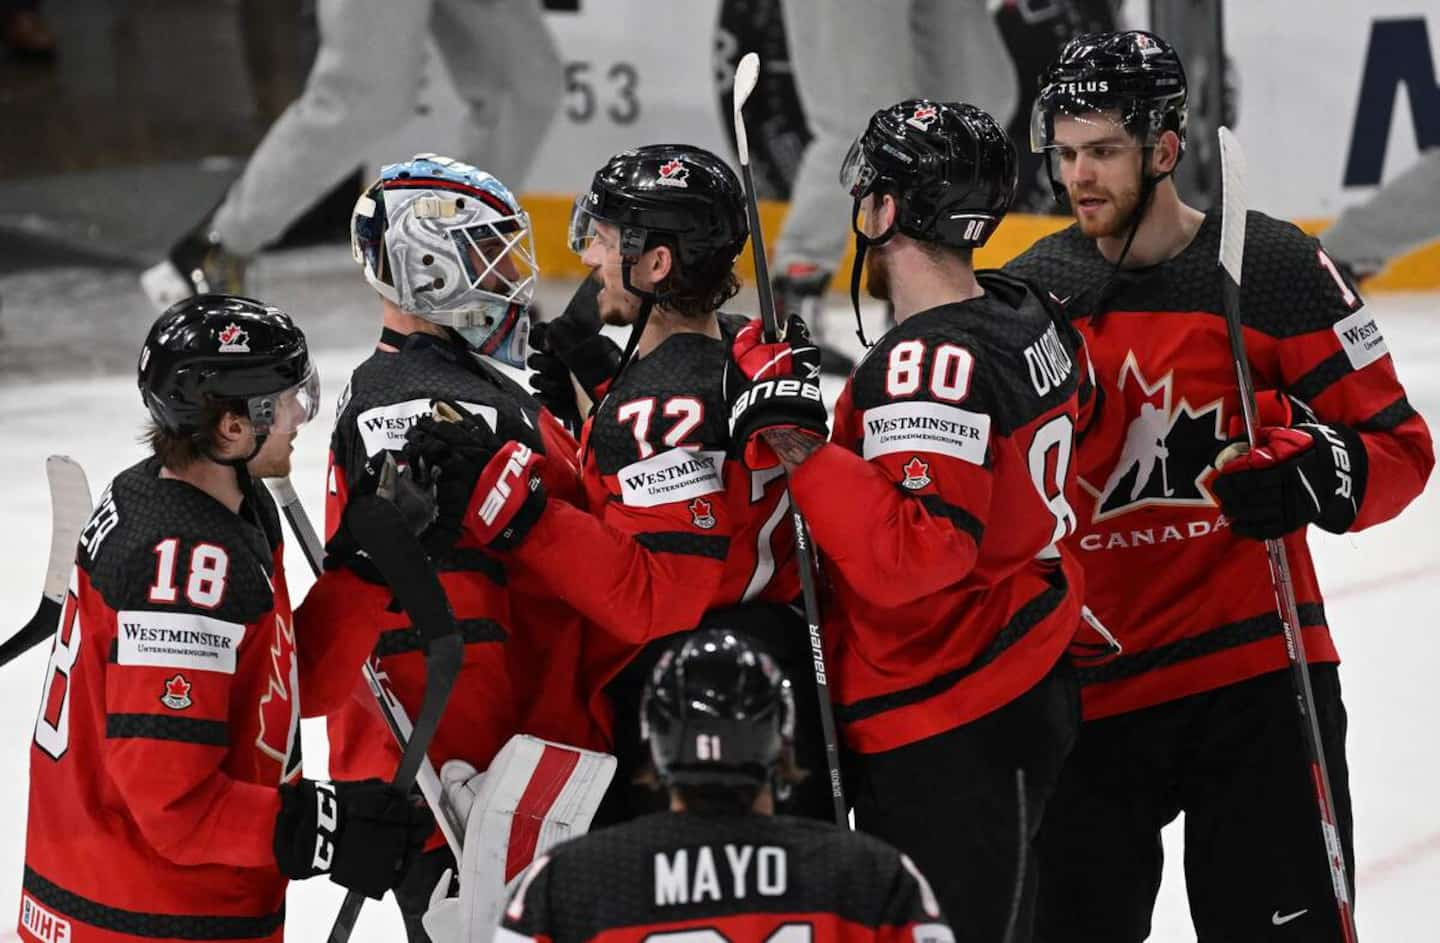 Canada will play for gold at Worlds